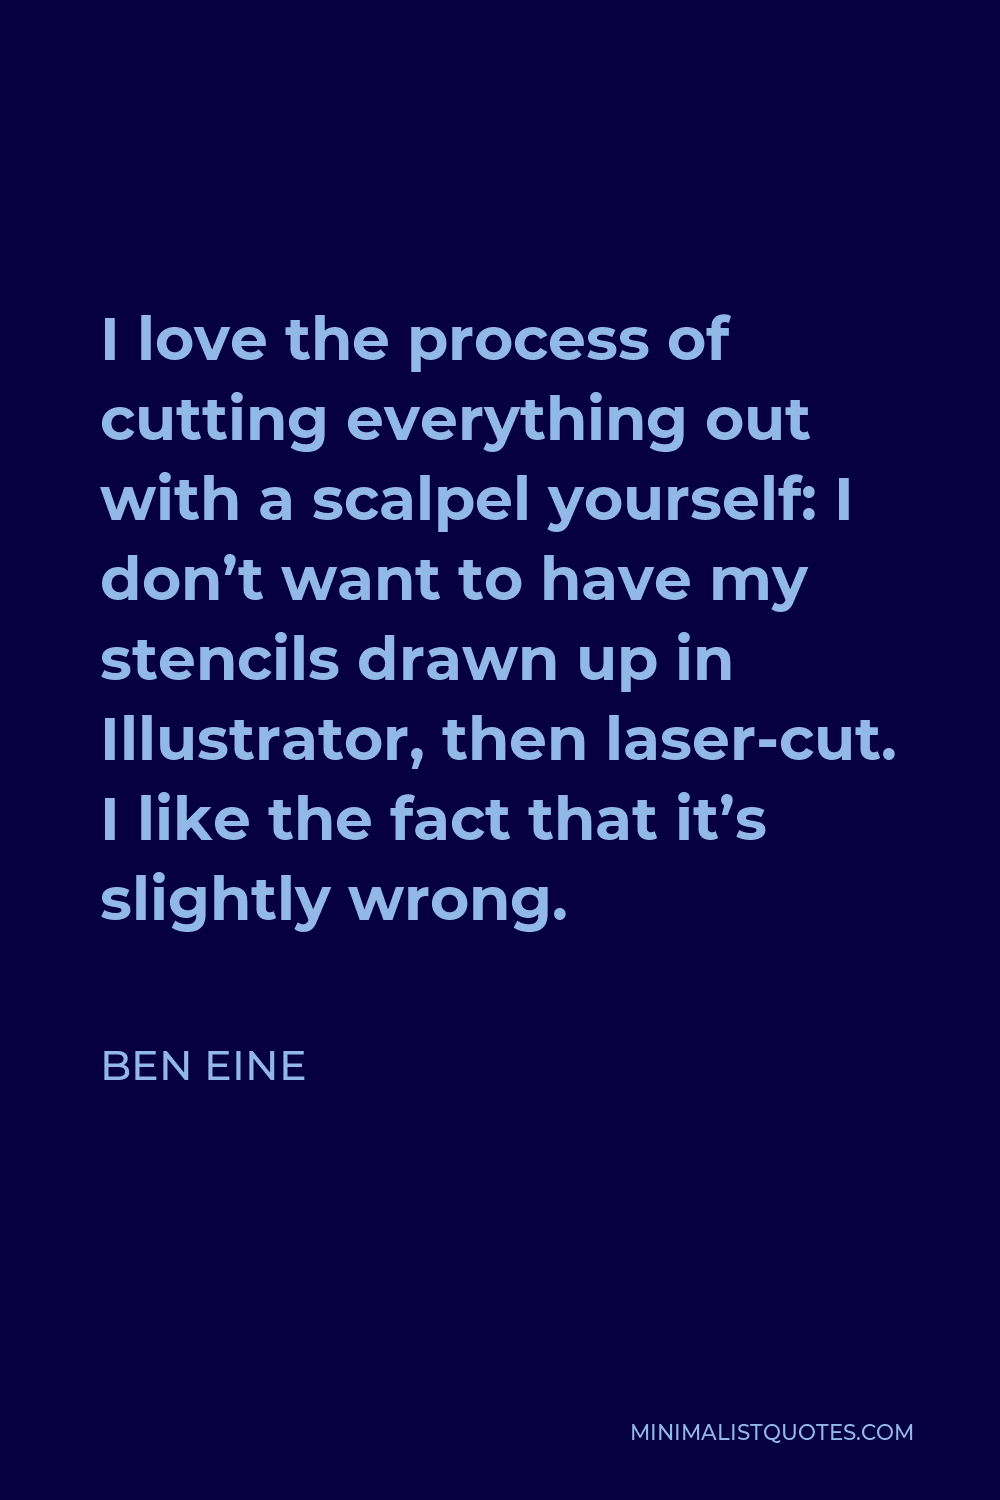 Ben Eine Quote - I love the process of cutting everything out with a scalpel yourself: I don’t want to have my stencils drawn up in Illustrator, then laser-cut. I like the fact that it’s slightly wrong.